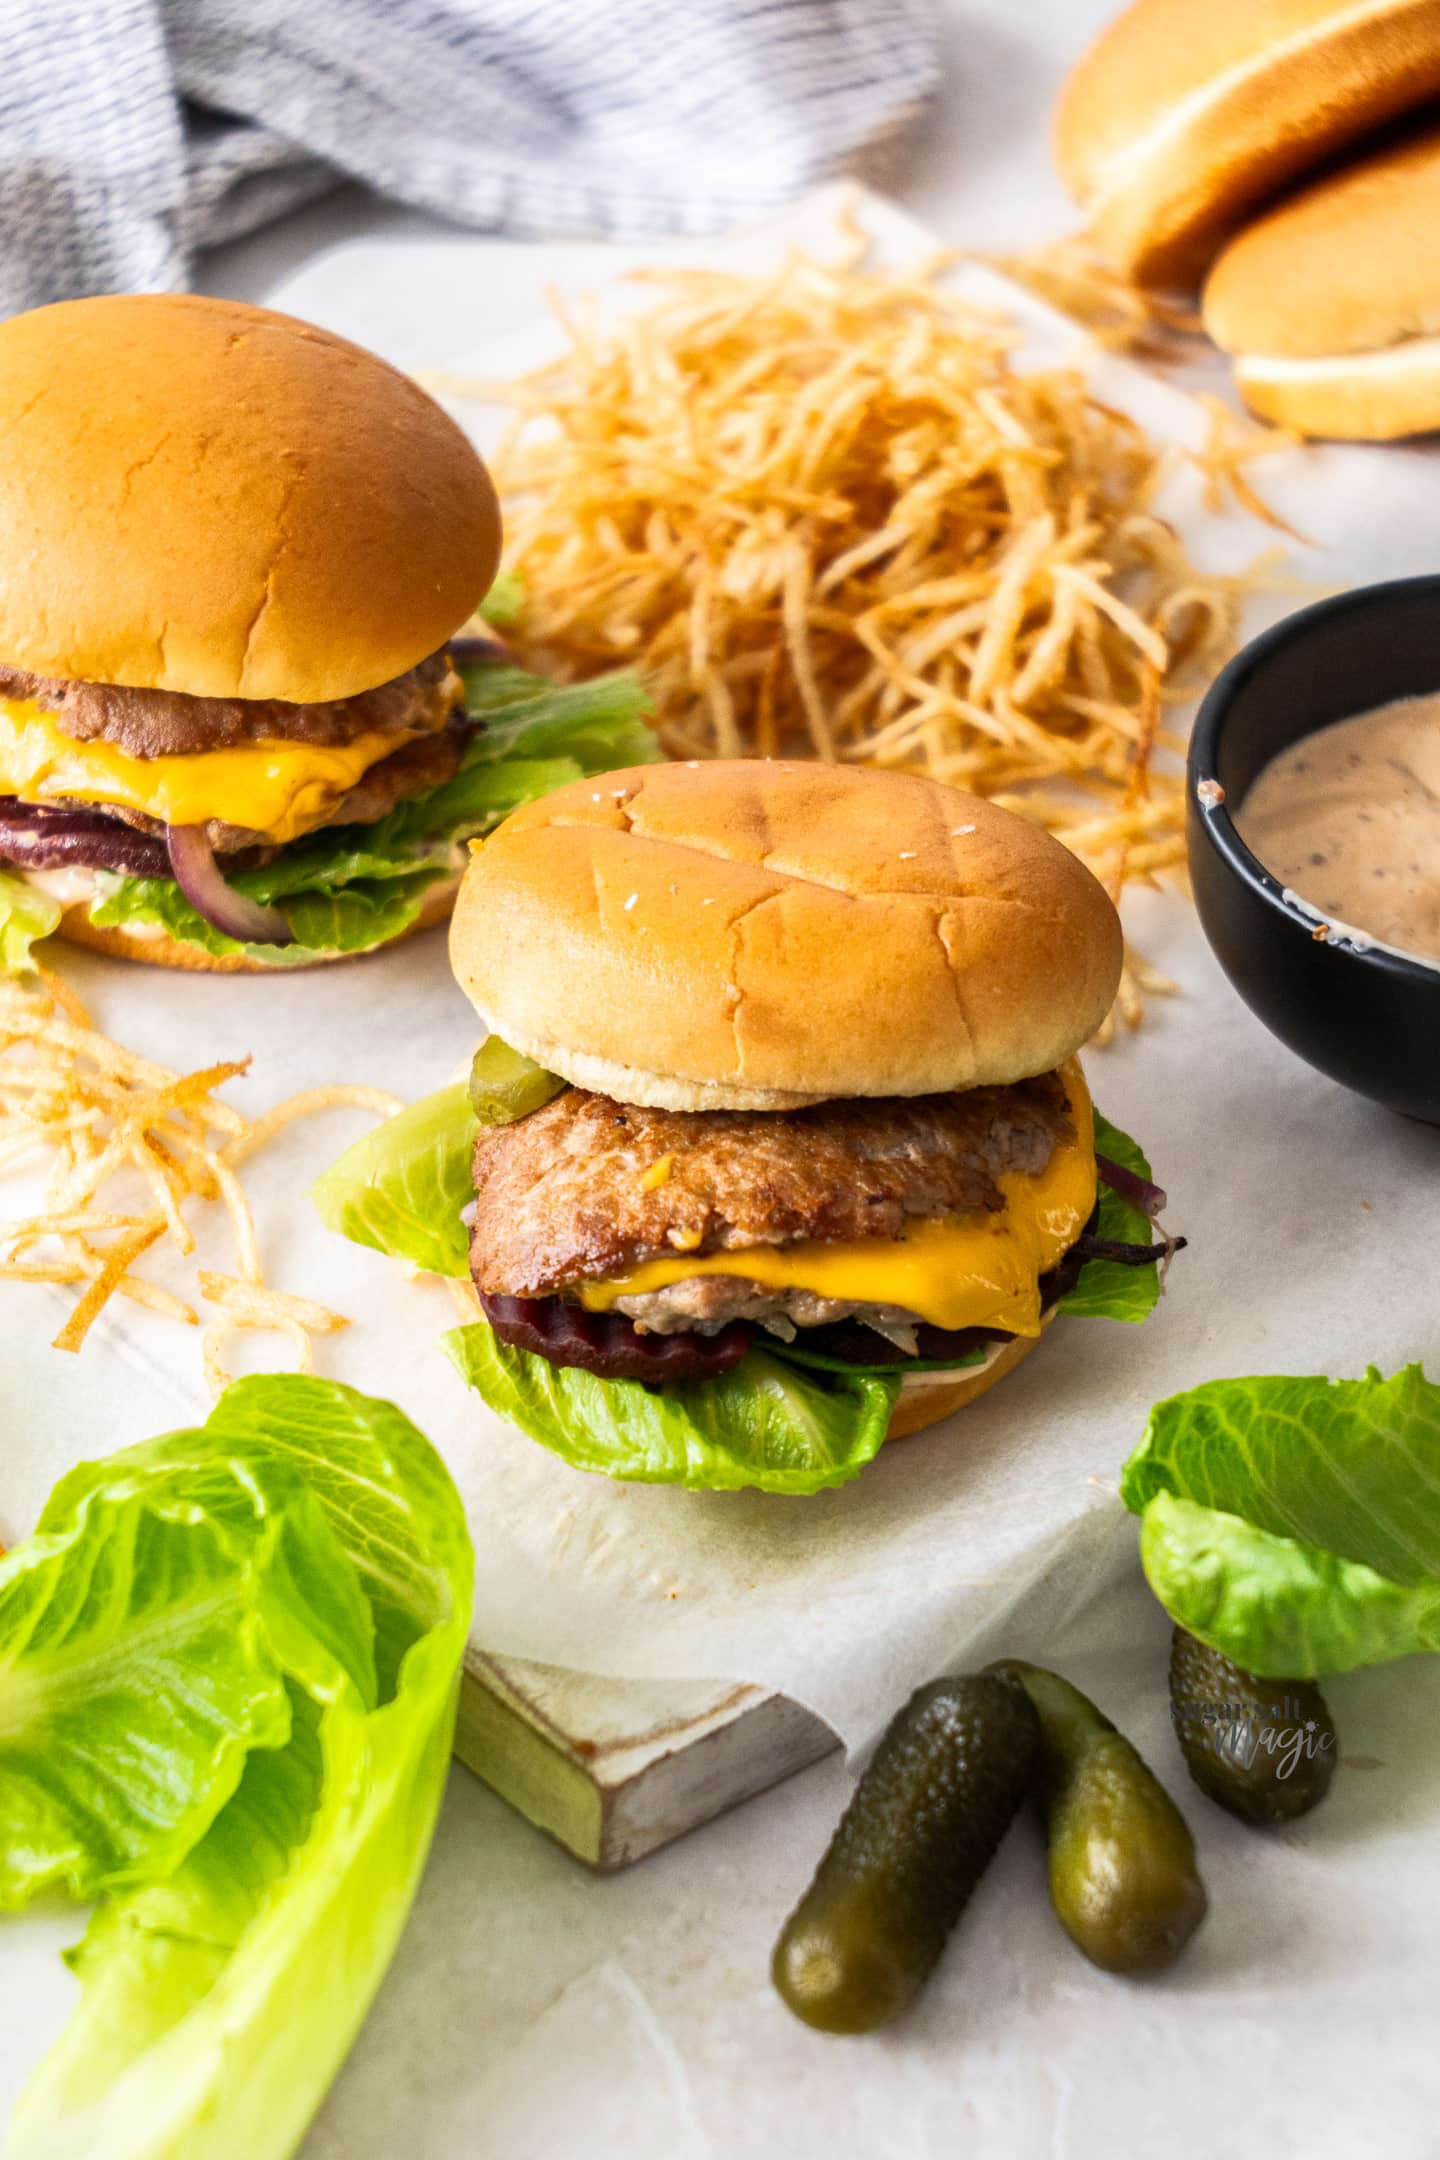 Two burgers on a platter with shoestring fries.